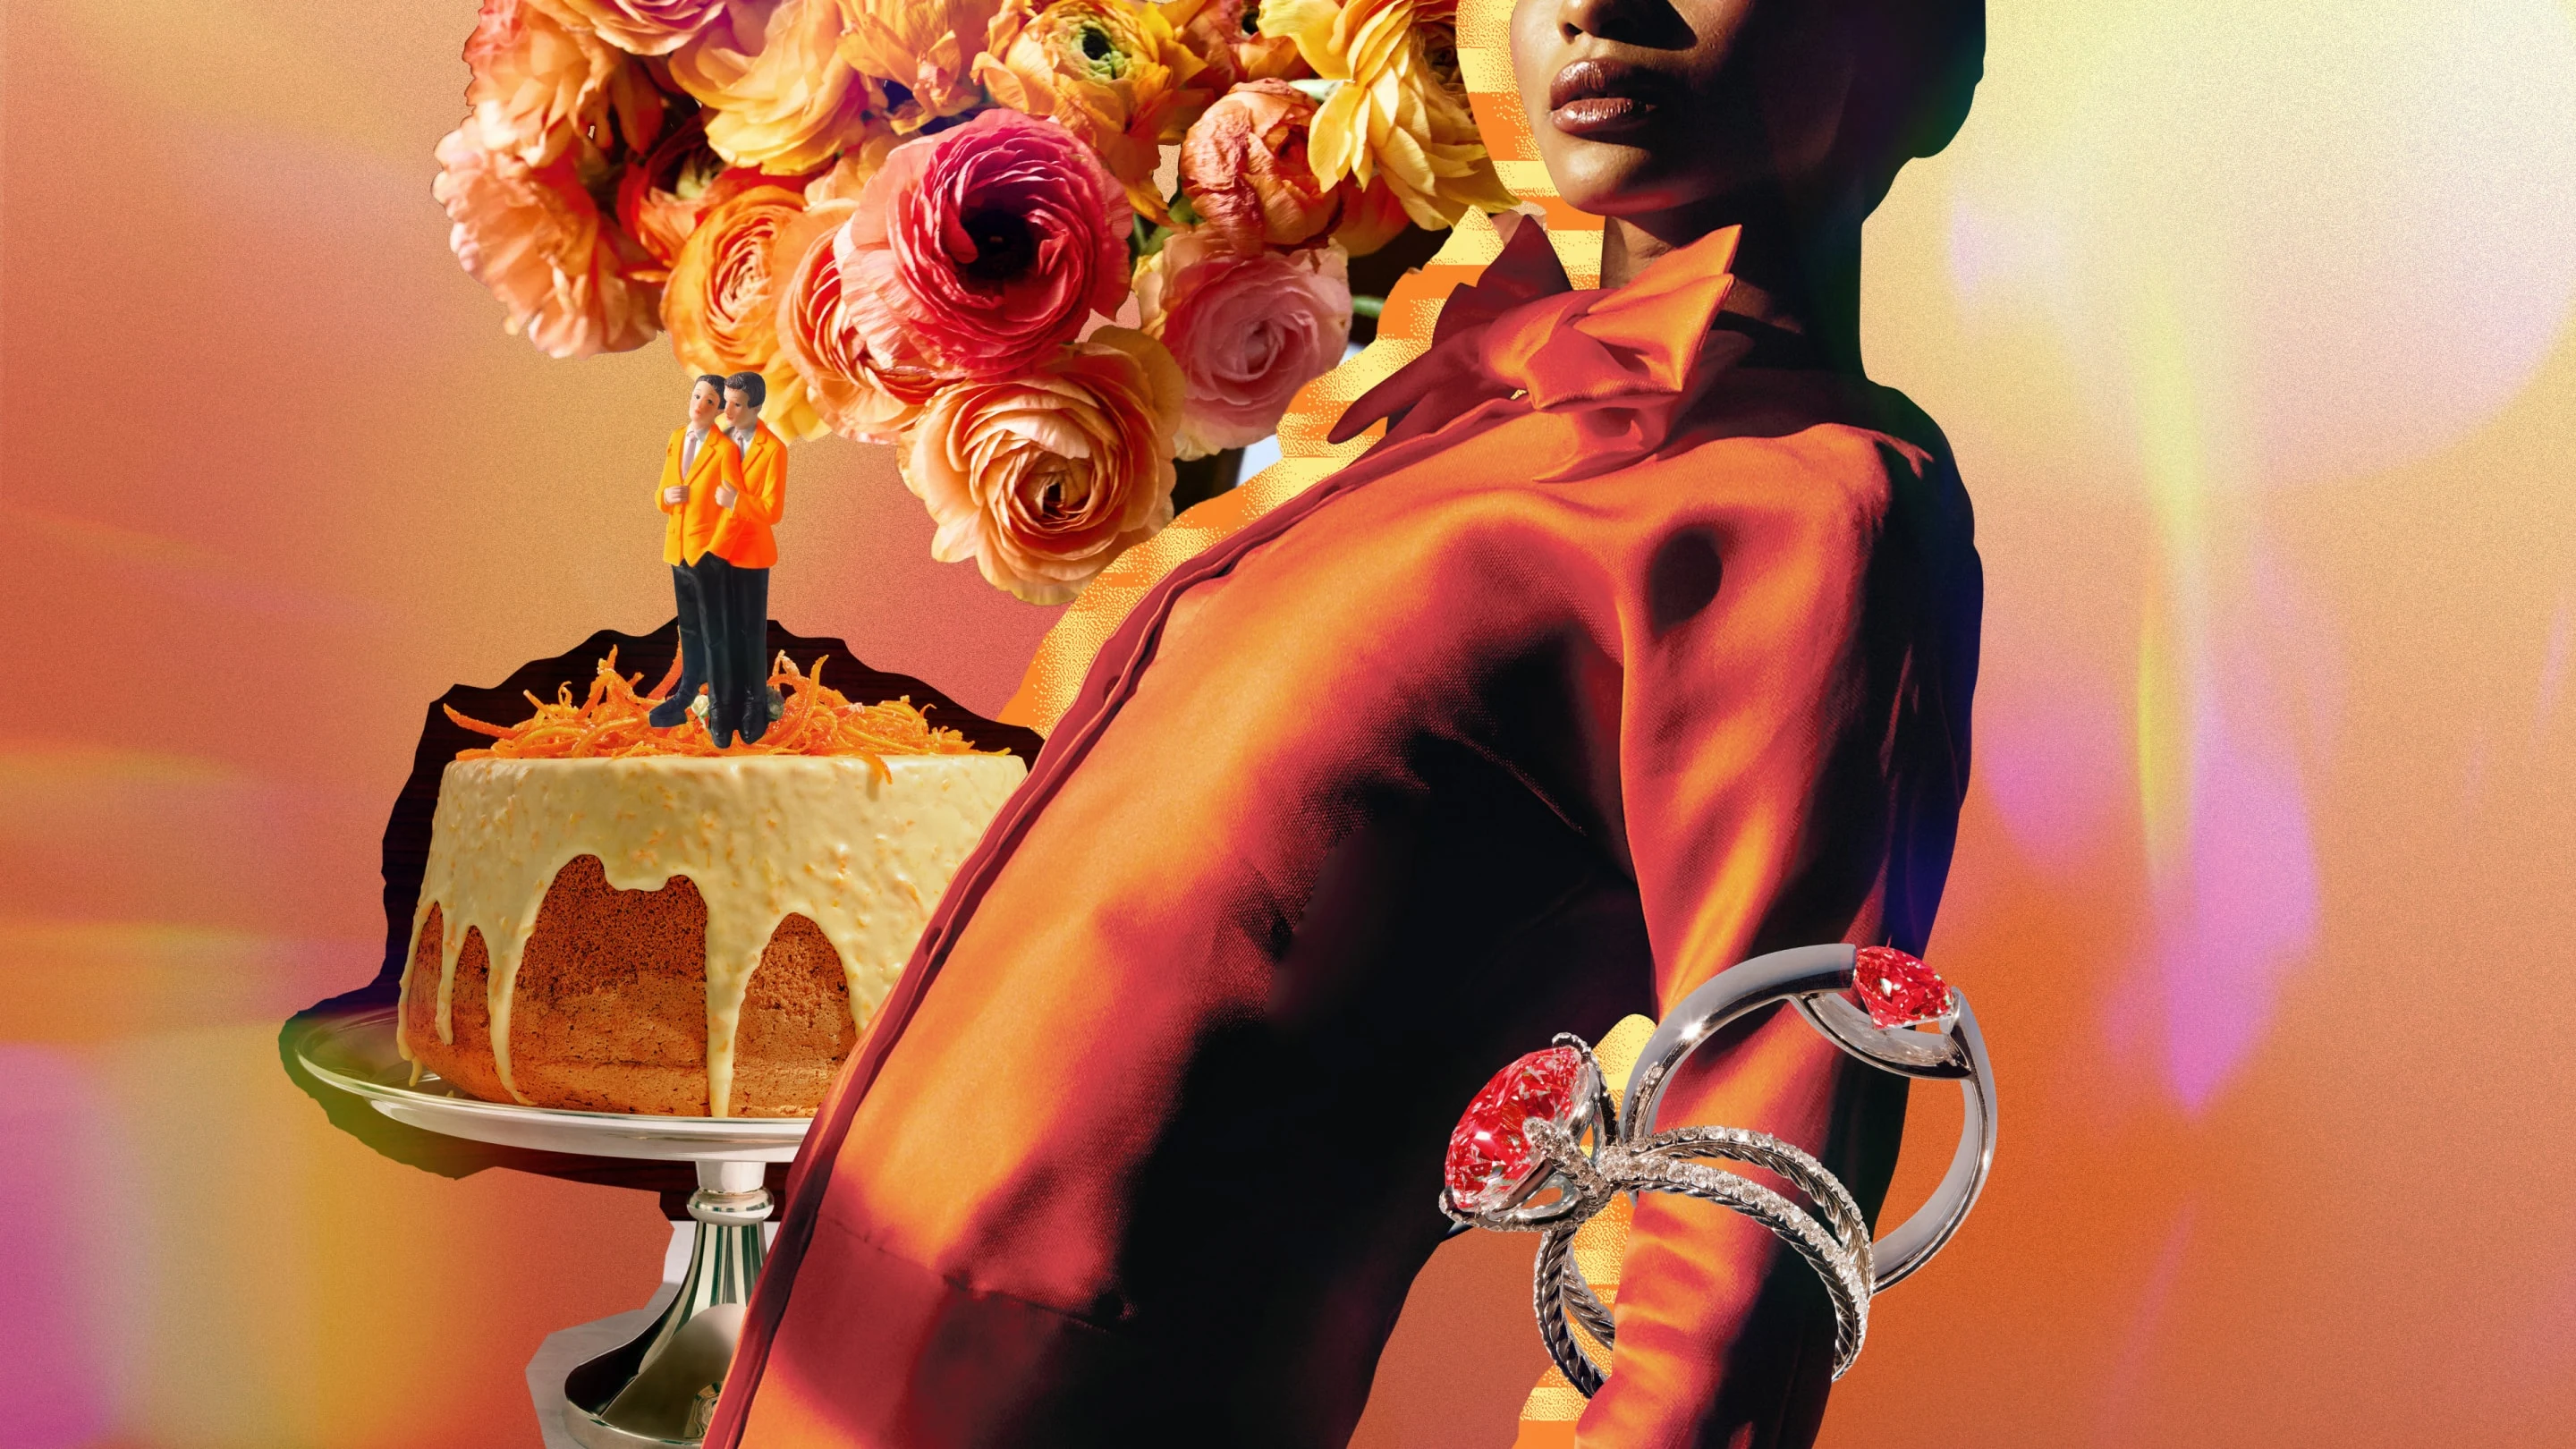 Black woman dressed in a rust-coloured button up shirt and bow tie collaged with other wedding-related objects such as a wedding cake, flowers and rings.